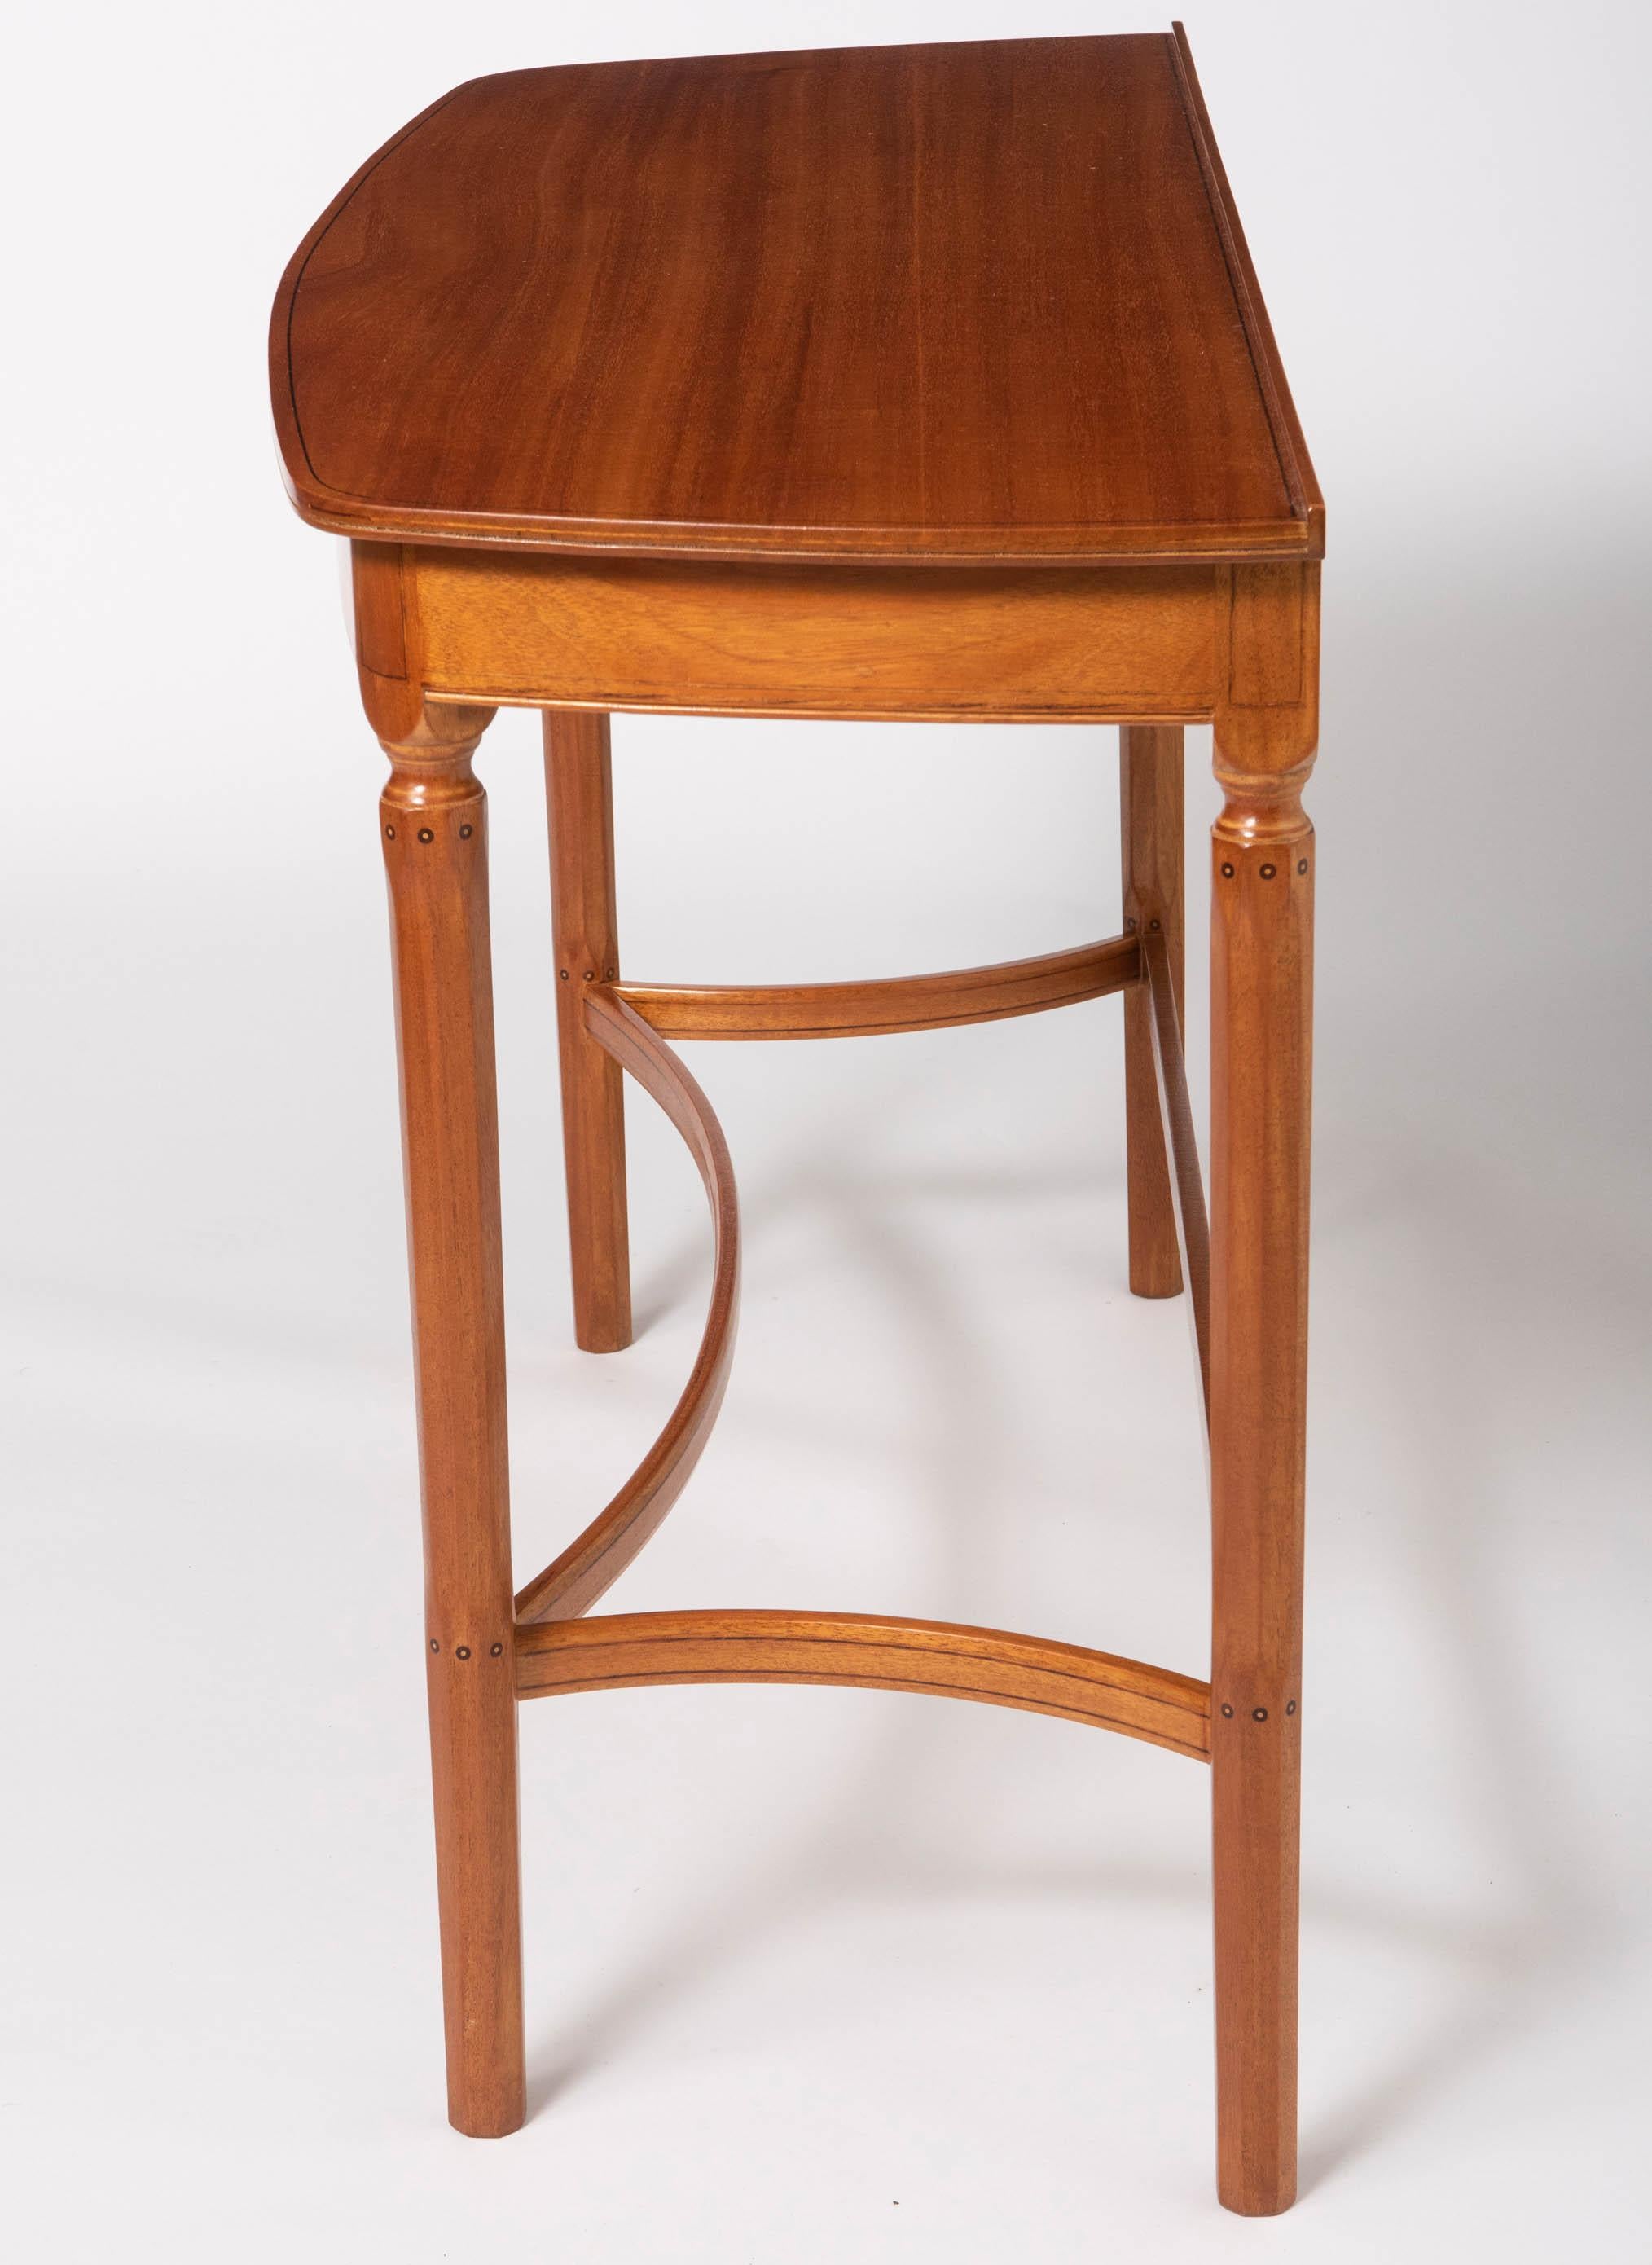 Pair of African Mahogany Side Tables by Edward Barnsley, England, circa 1956 (Englisch) im Angebot